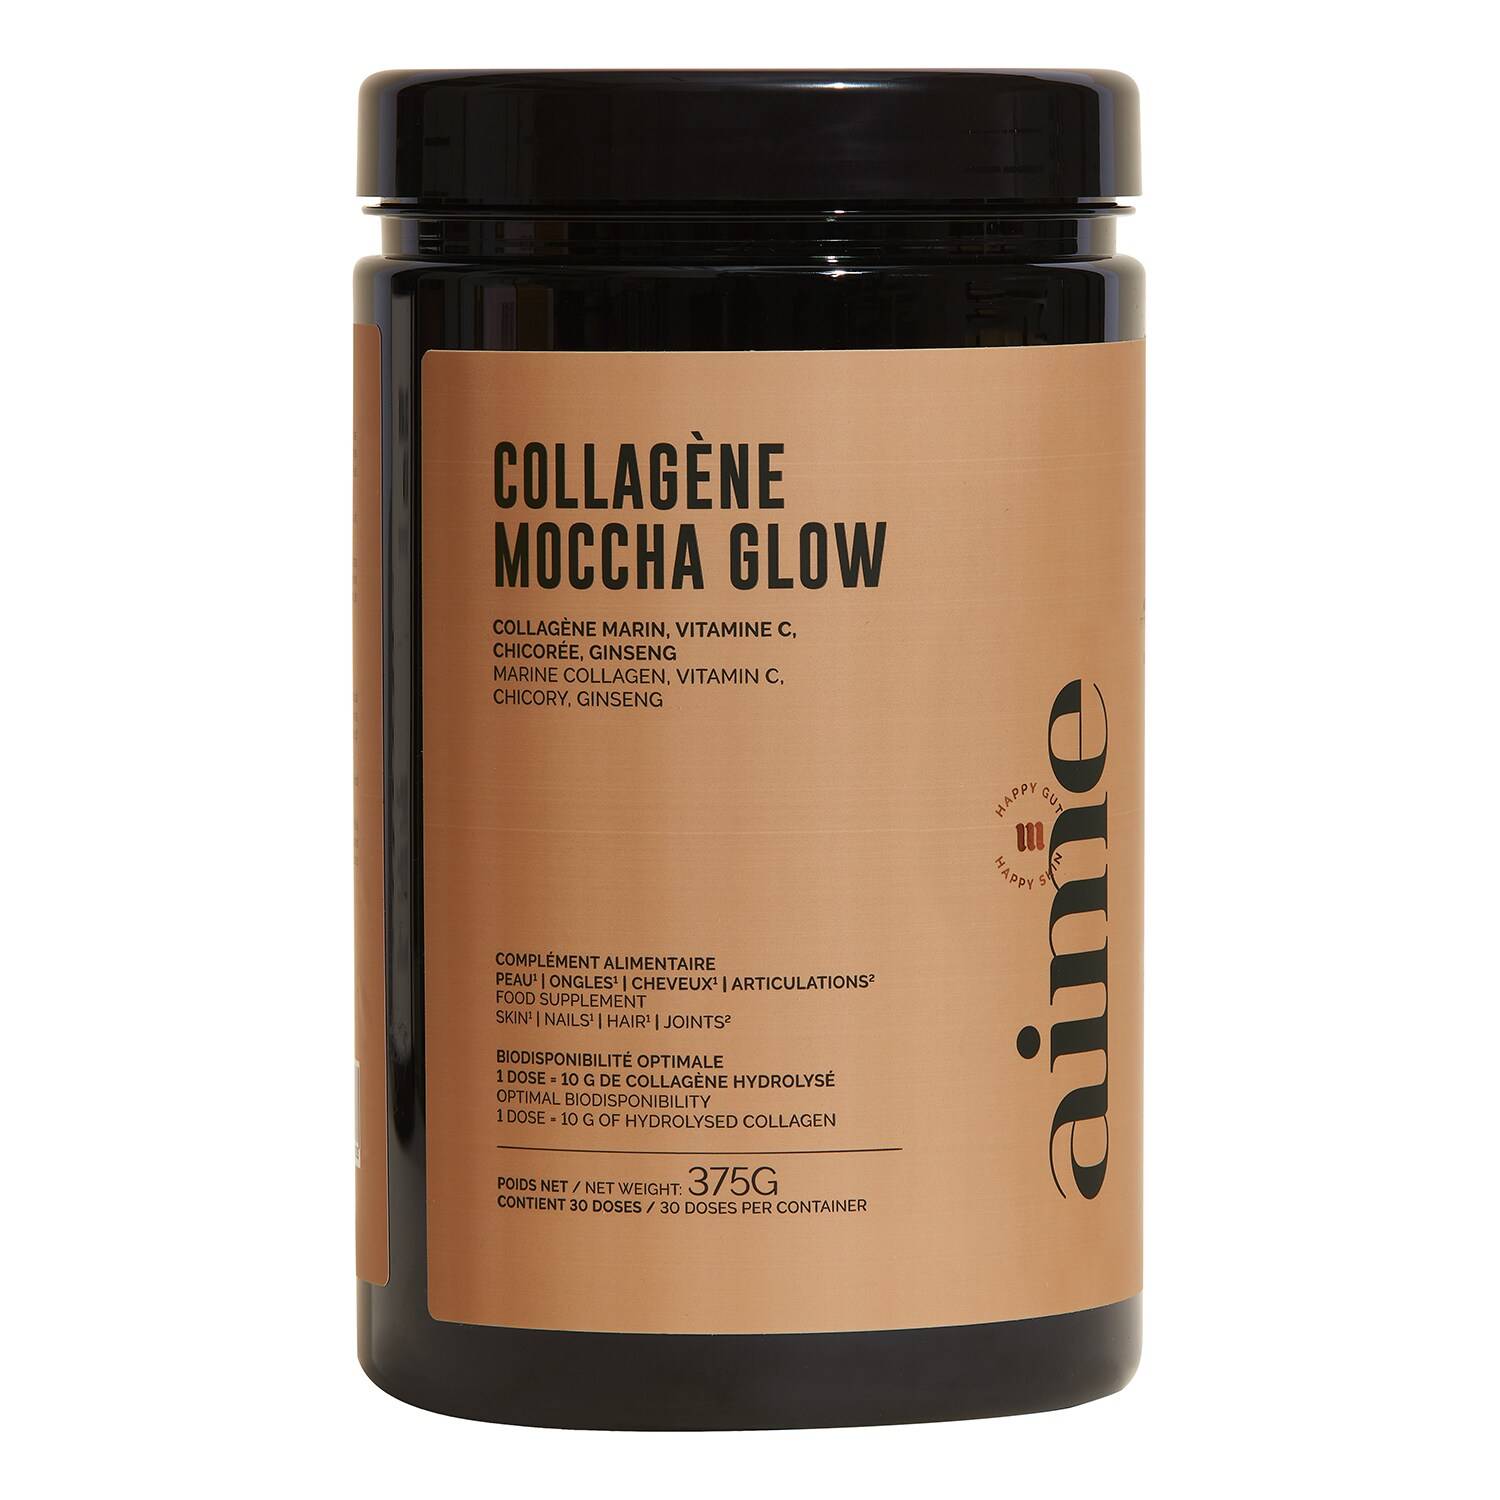 Aime Collagene Moccha Glow Food Supplement 30 Days Treatment